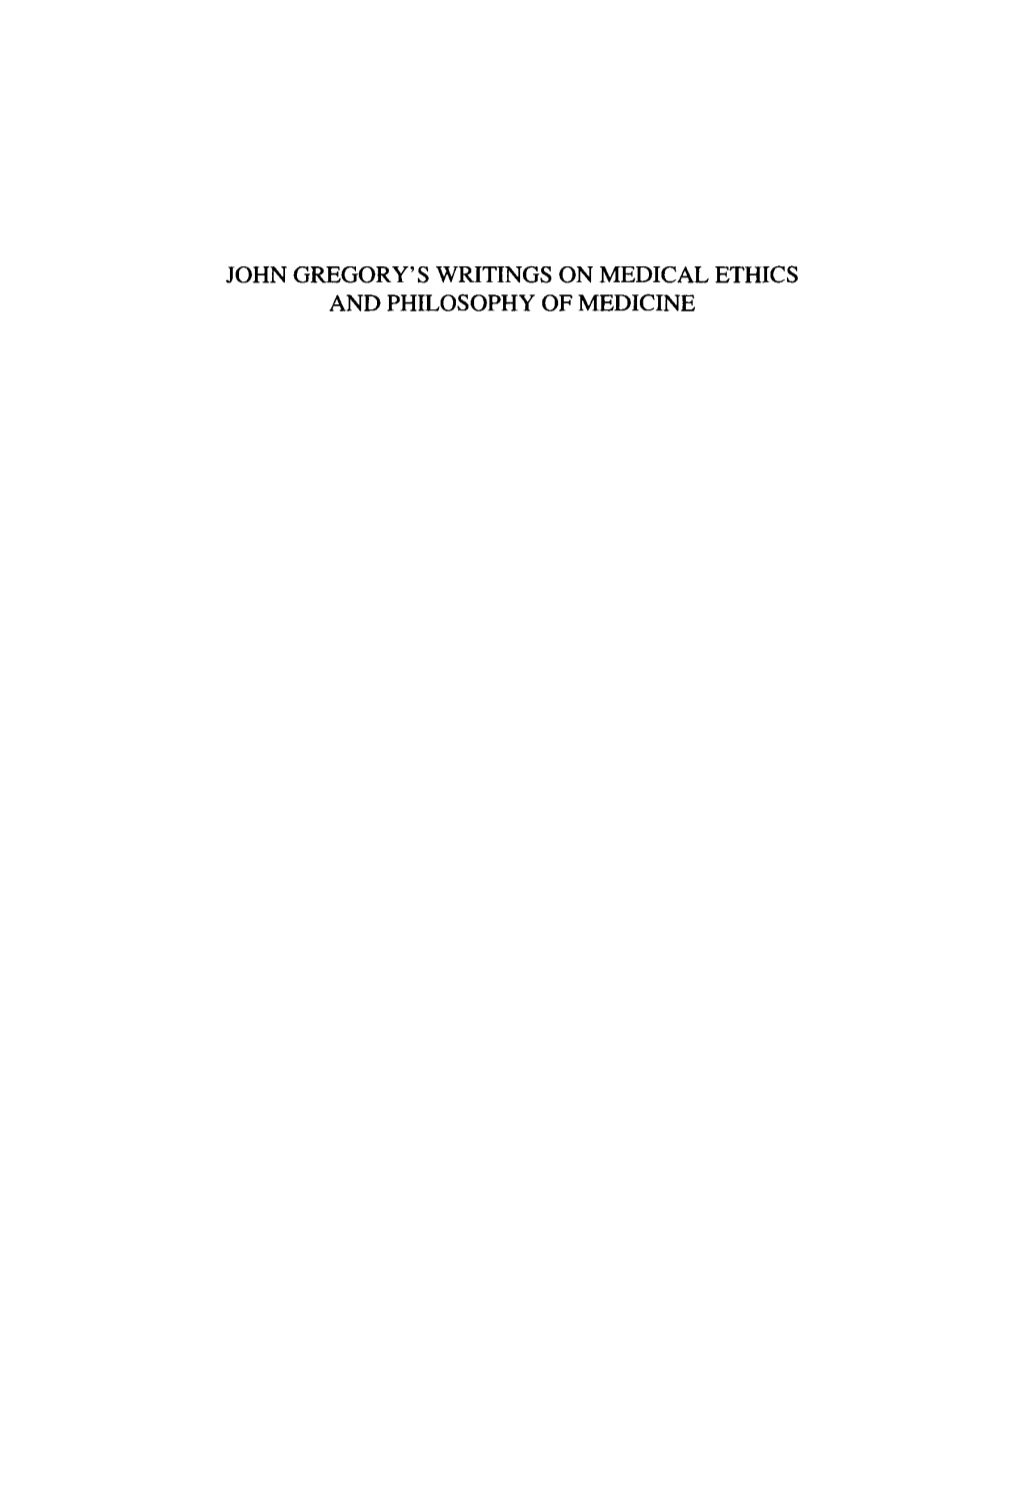 JOHN GREGORY's WRITINGS on MEDICAL ETHICS and PHILOSOPHY of MEDICINE Philosophy and Medicine VOLUME 57